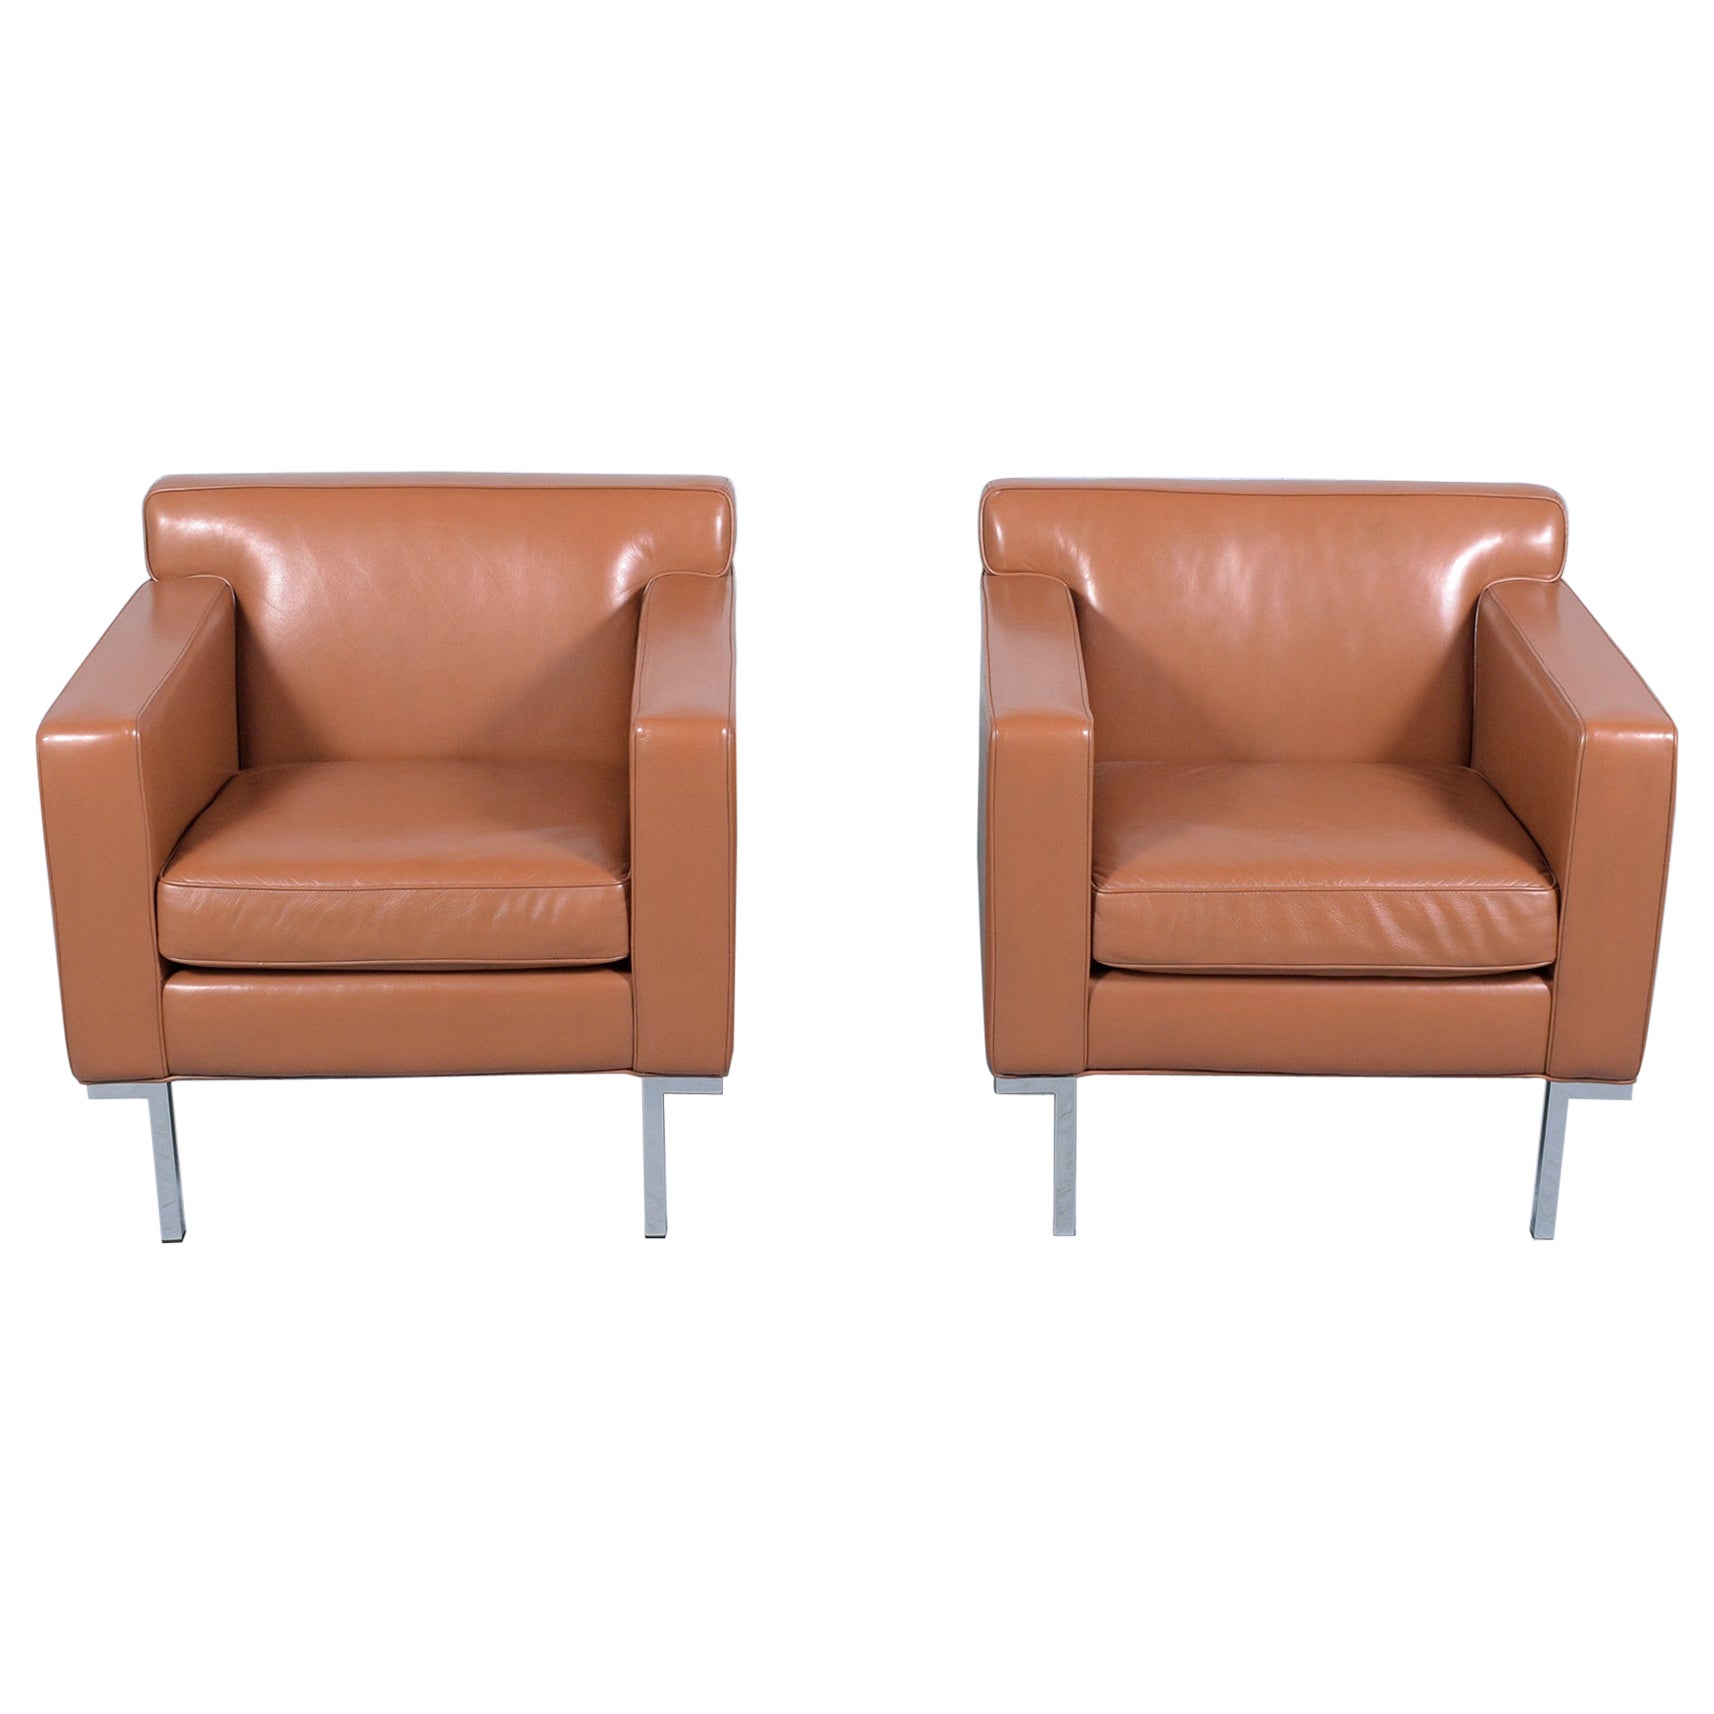 Pair of 1980s Vintage Cognac Leather Modern Club Chairs